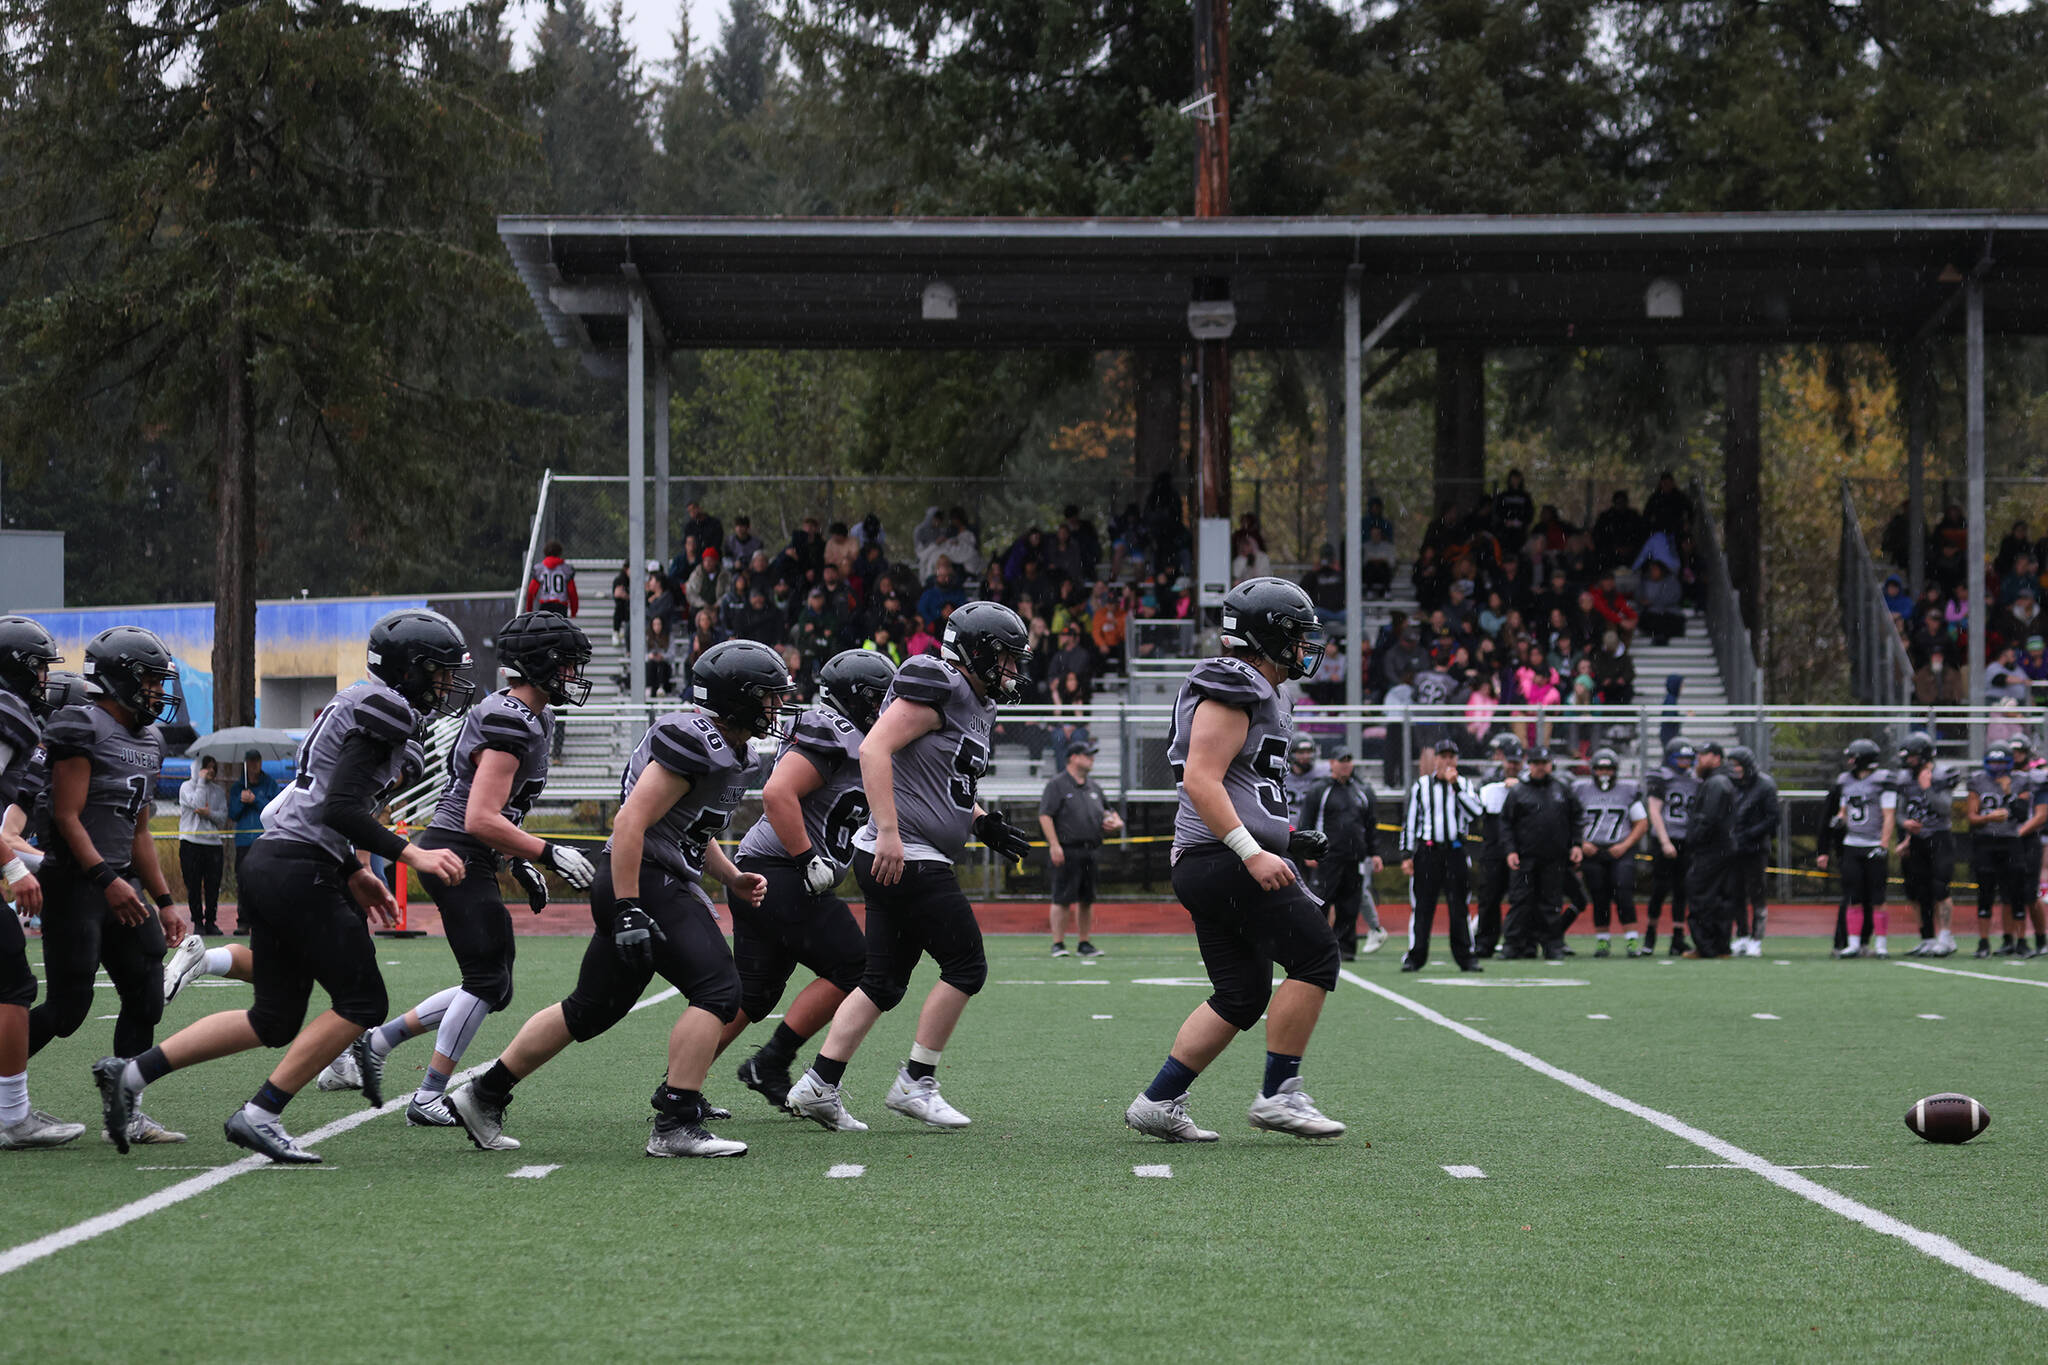 Juneau’s offense breaks the huddle and heads toward the ball during a lopsided playoff win against South Anchorage. (Ben Hohenstatt / Juneau Empire)